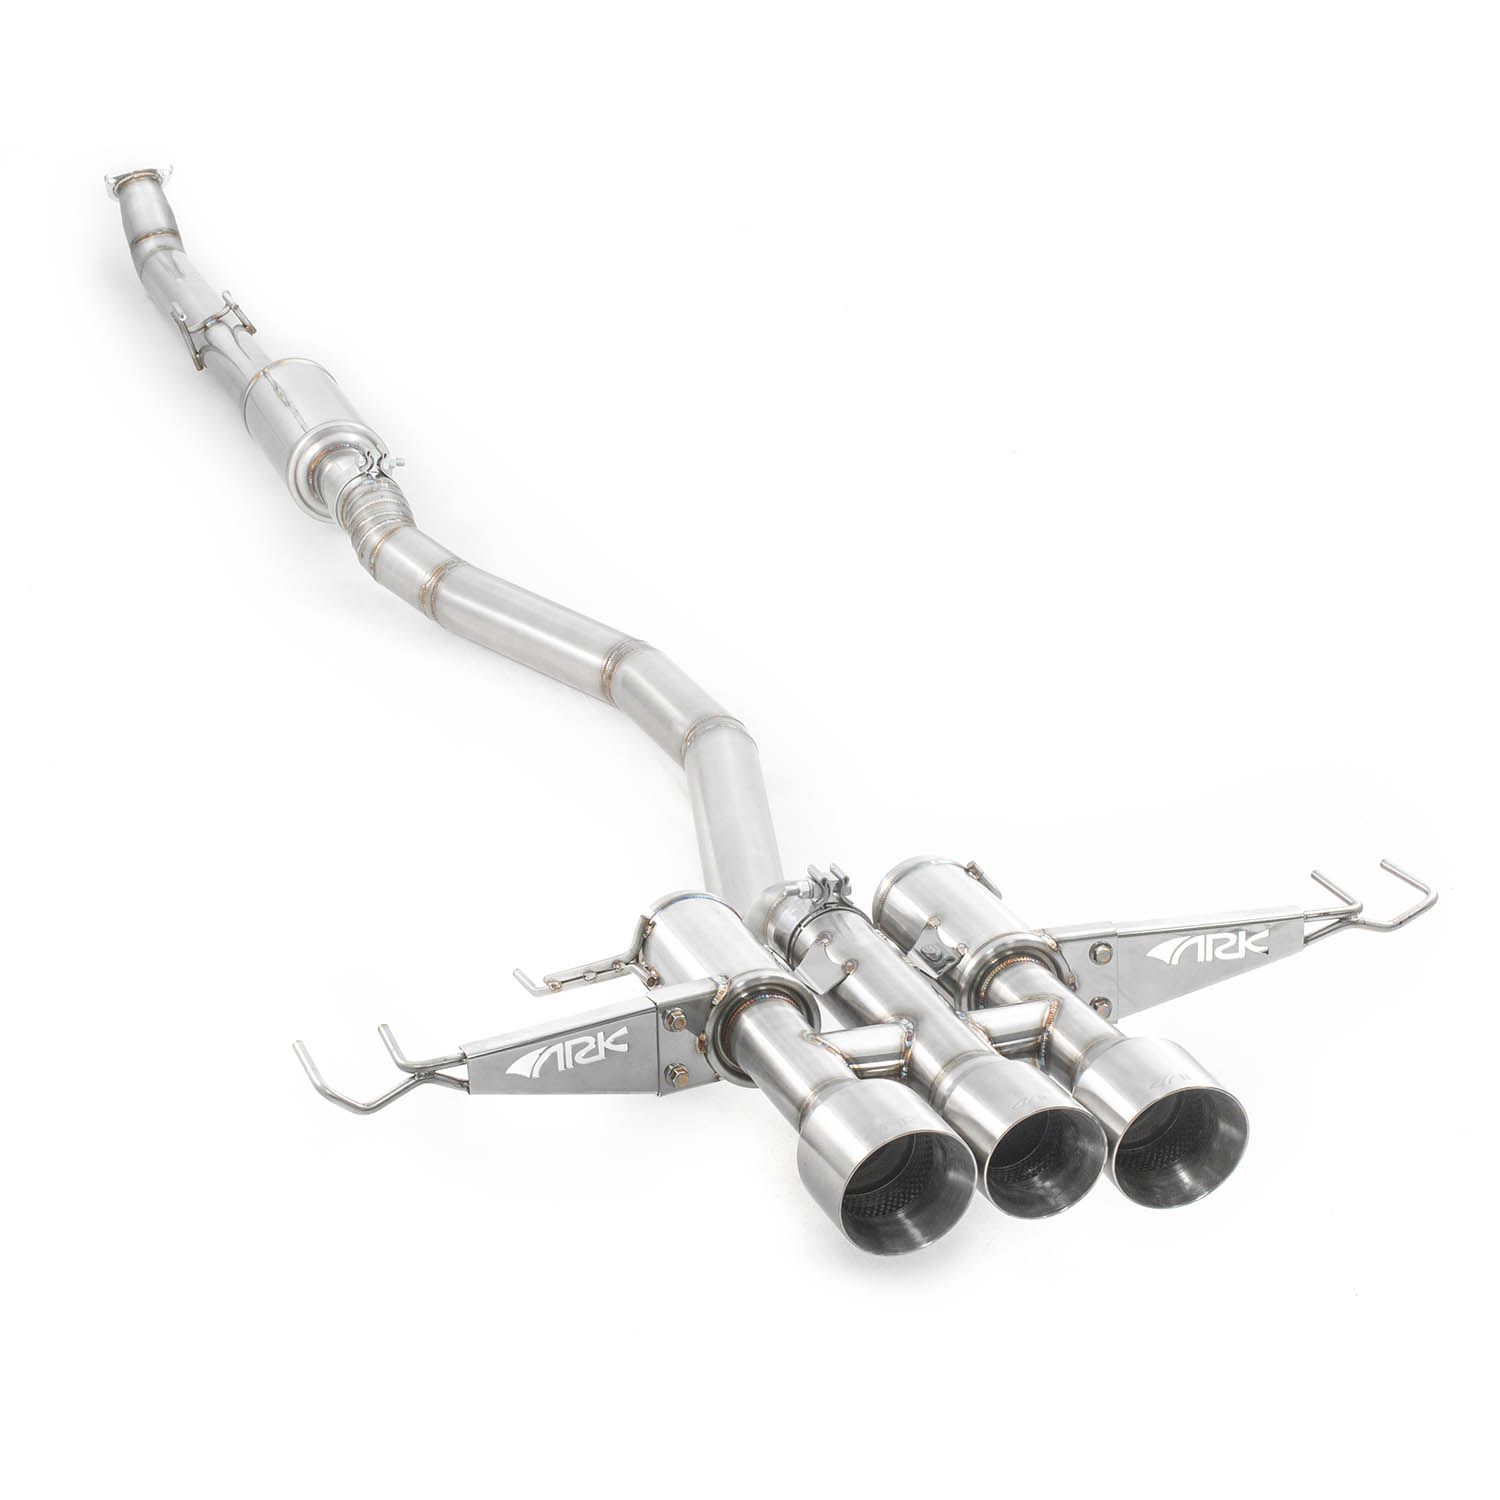 Ark Performance DT-S Cat-Back Exhaust System - Honda Civic Type-R 17+